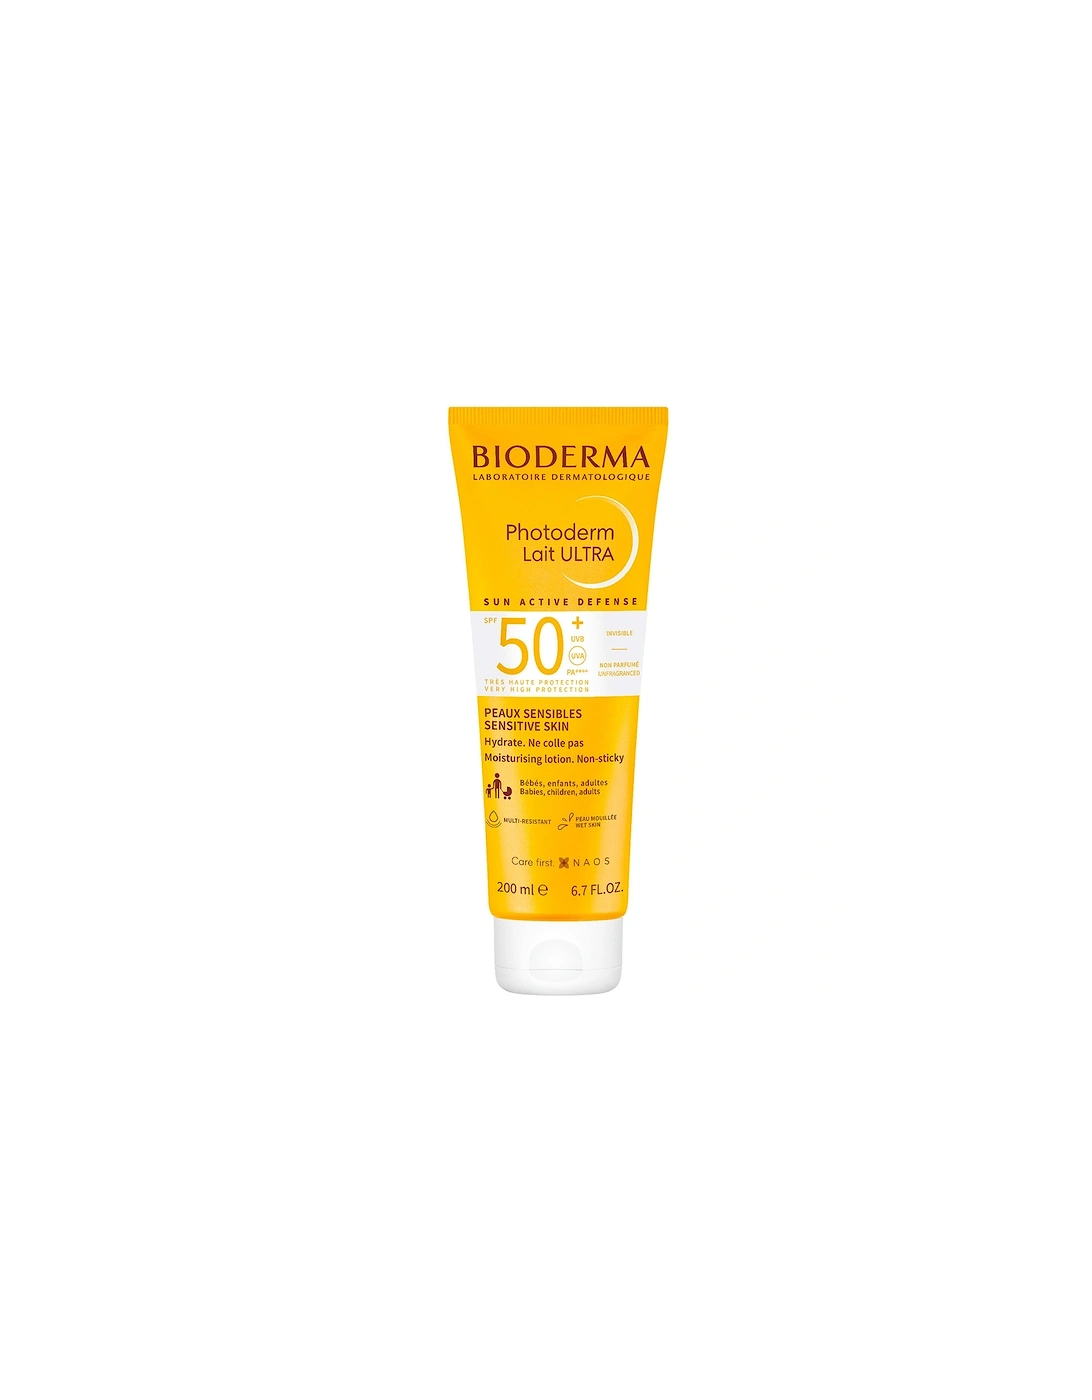 Photoderm Lait Ultra SPF50+ Very High Protection Sunscreen 200ml, 2 of 1